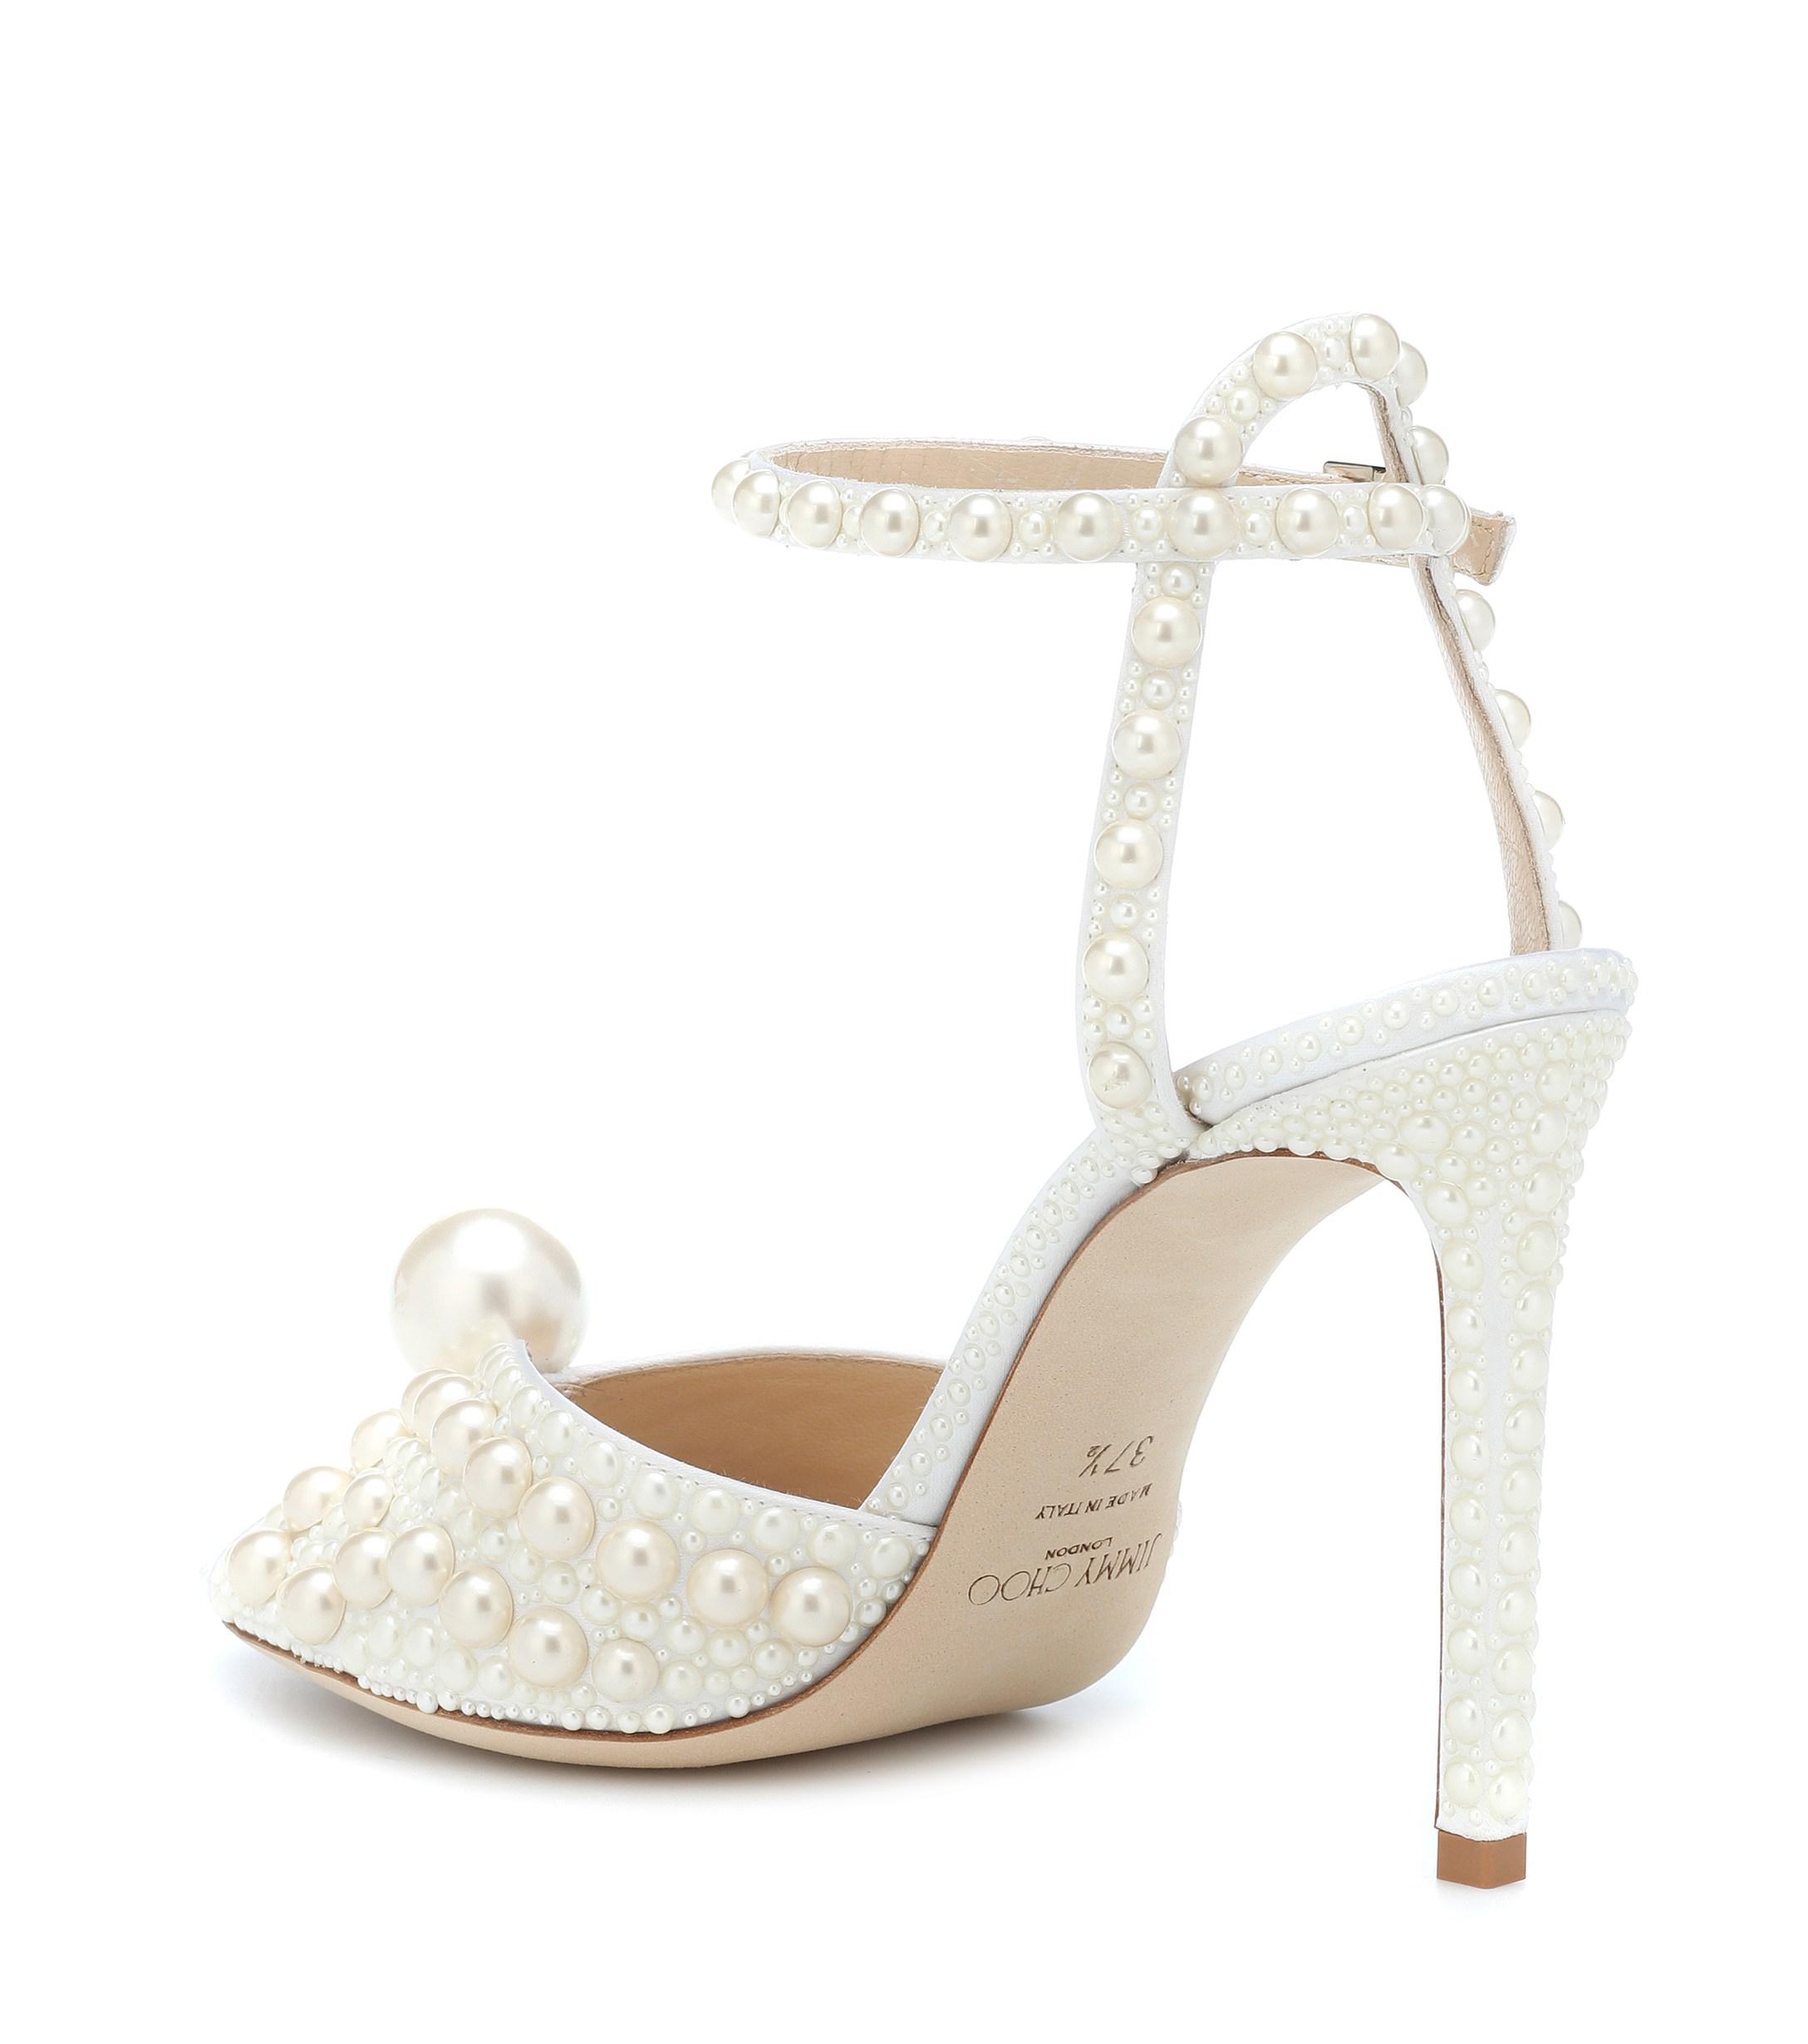 Jimmy Choo Sacora 100 Satin Pearl Sandals in White - Save 65% - Lyst